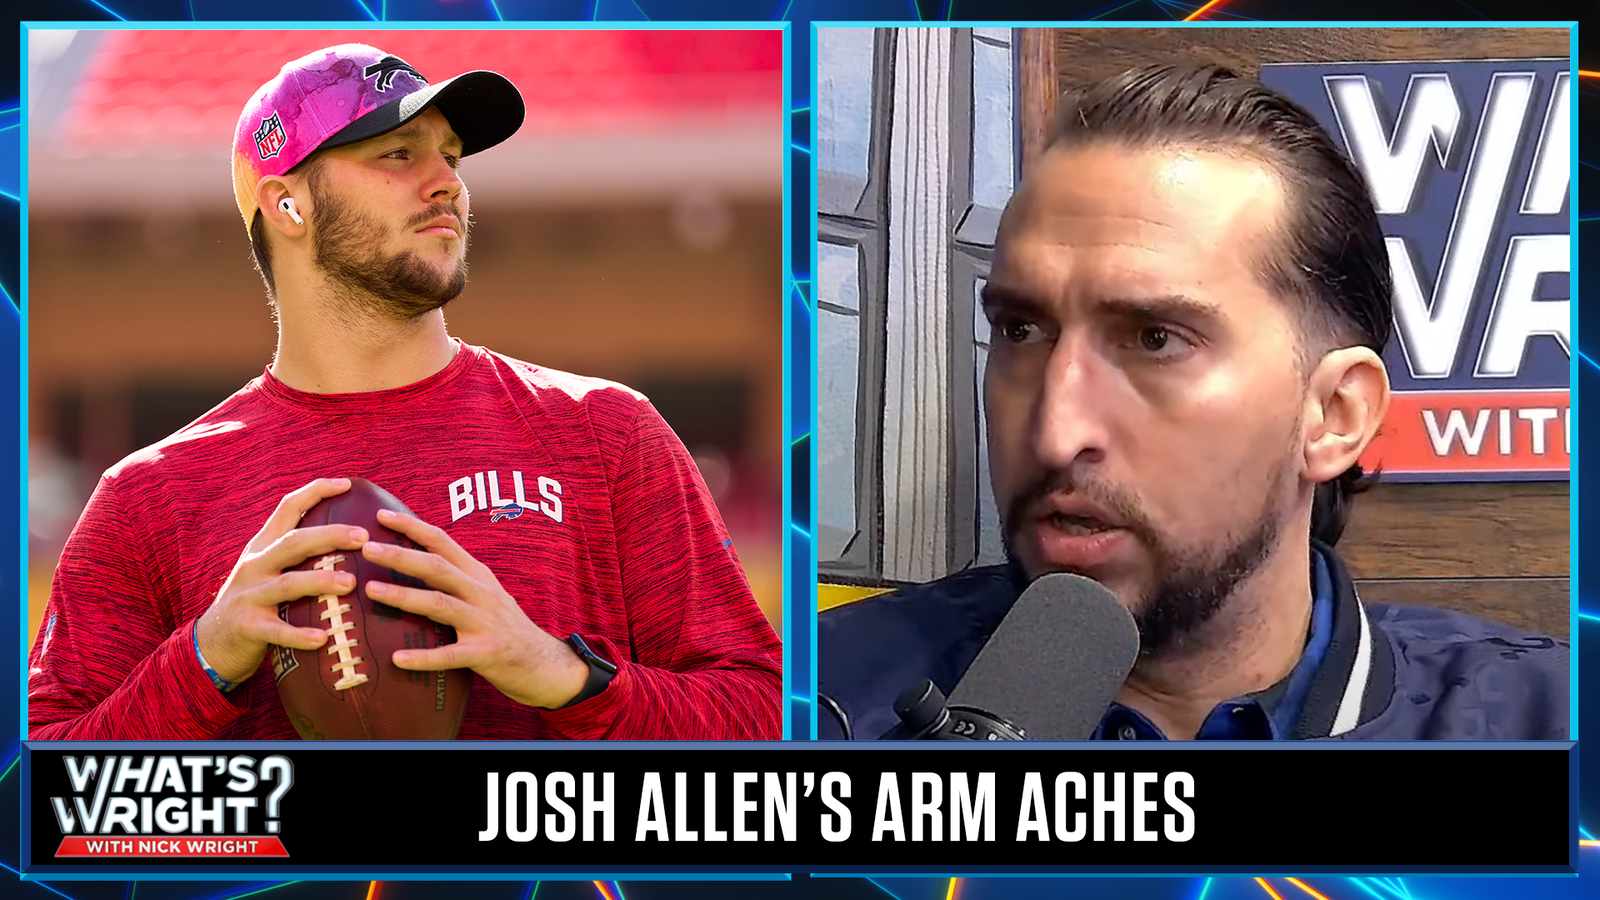 The Bills aren't equipped to win without Josh Allen